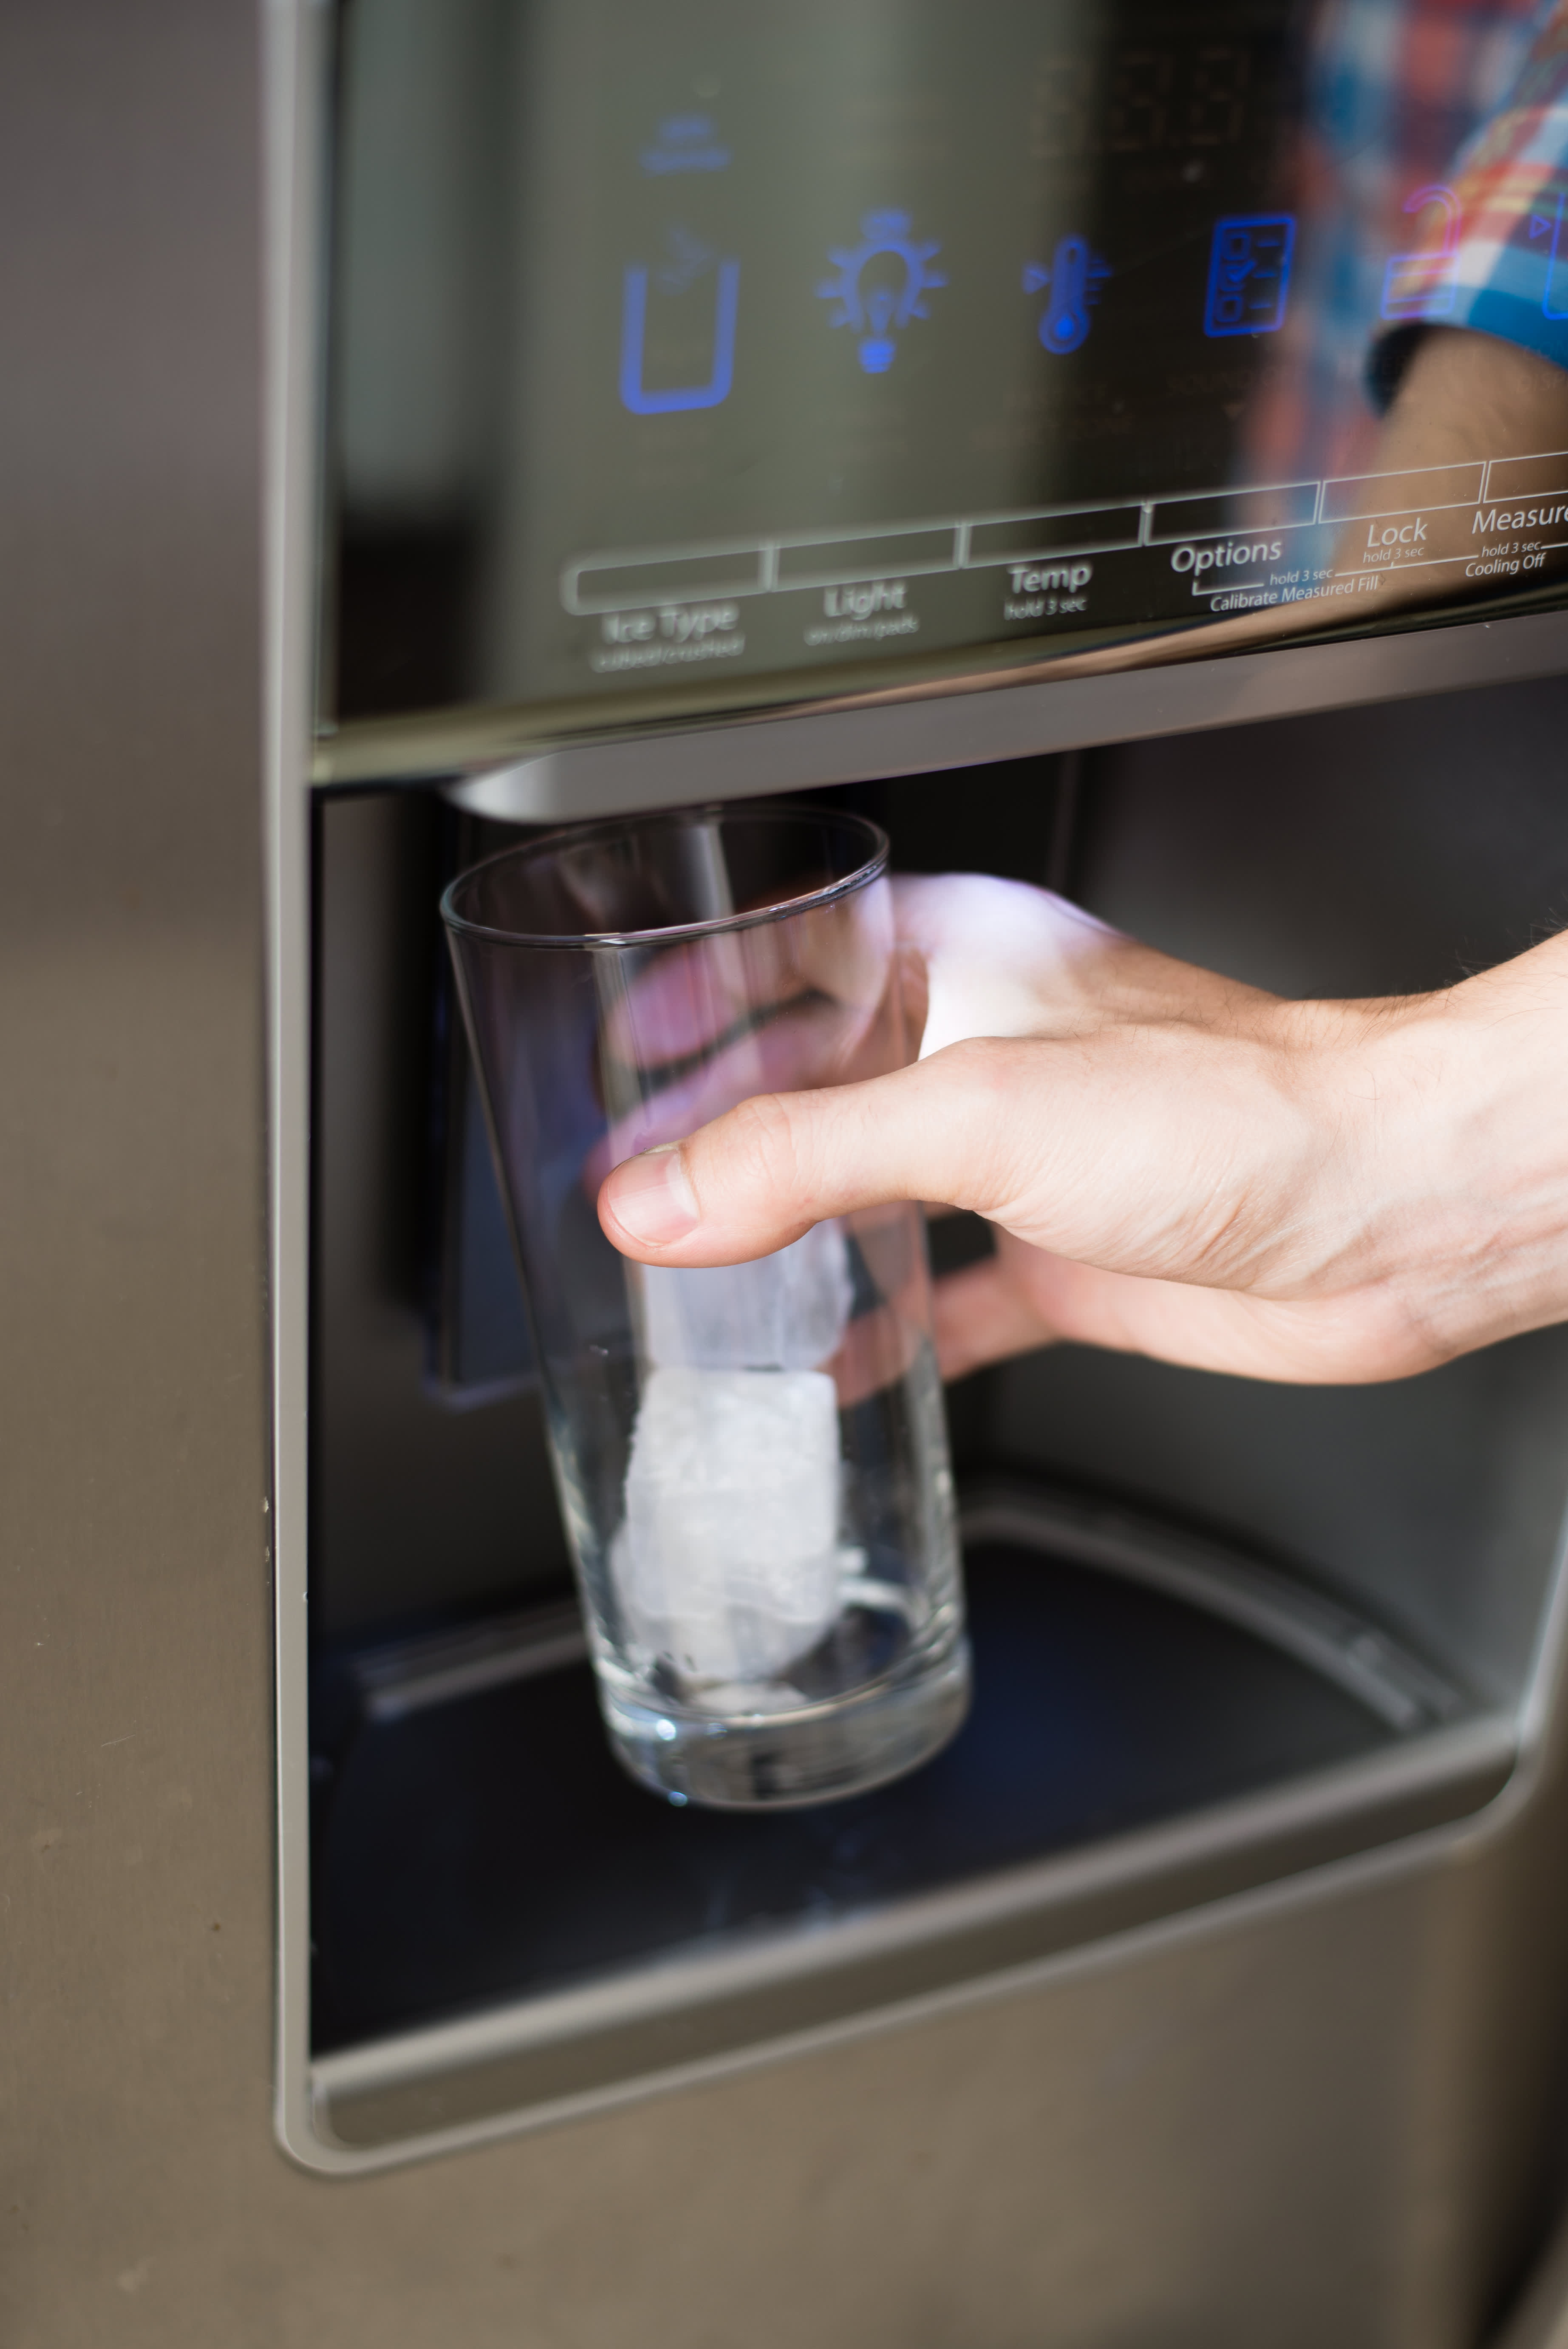 Does Mold Is Growing In Your Ice Machine?